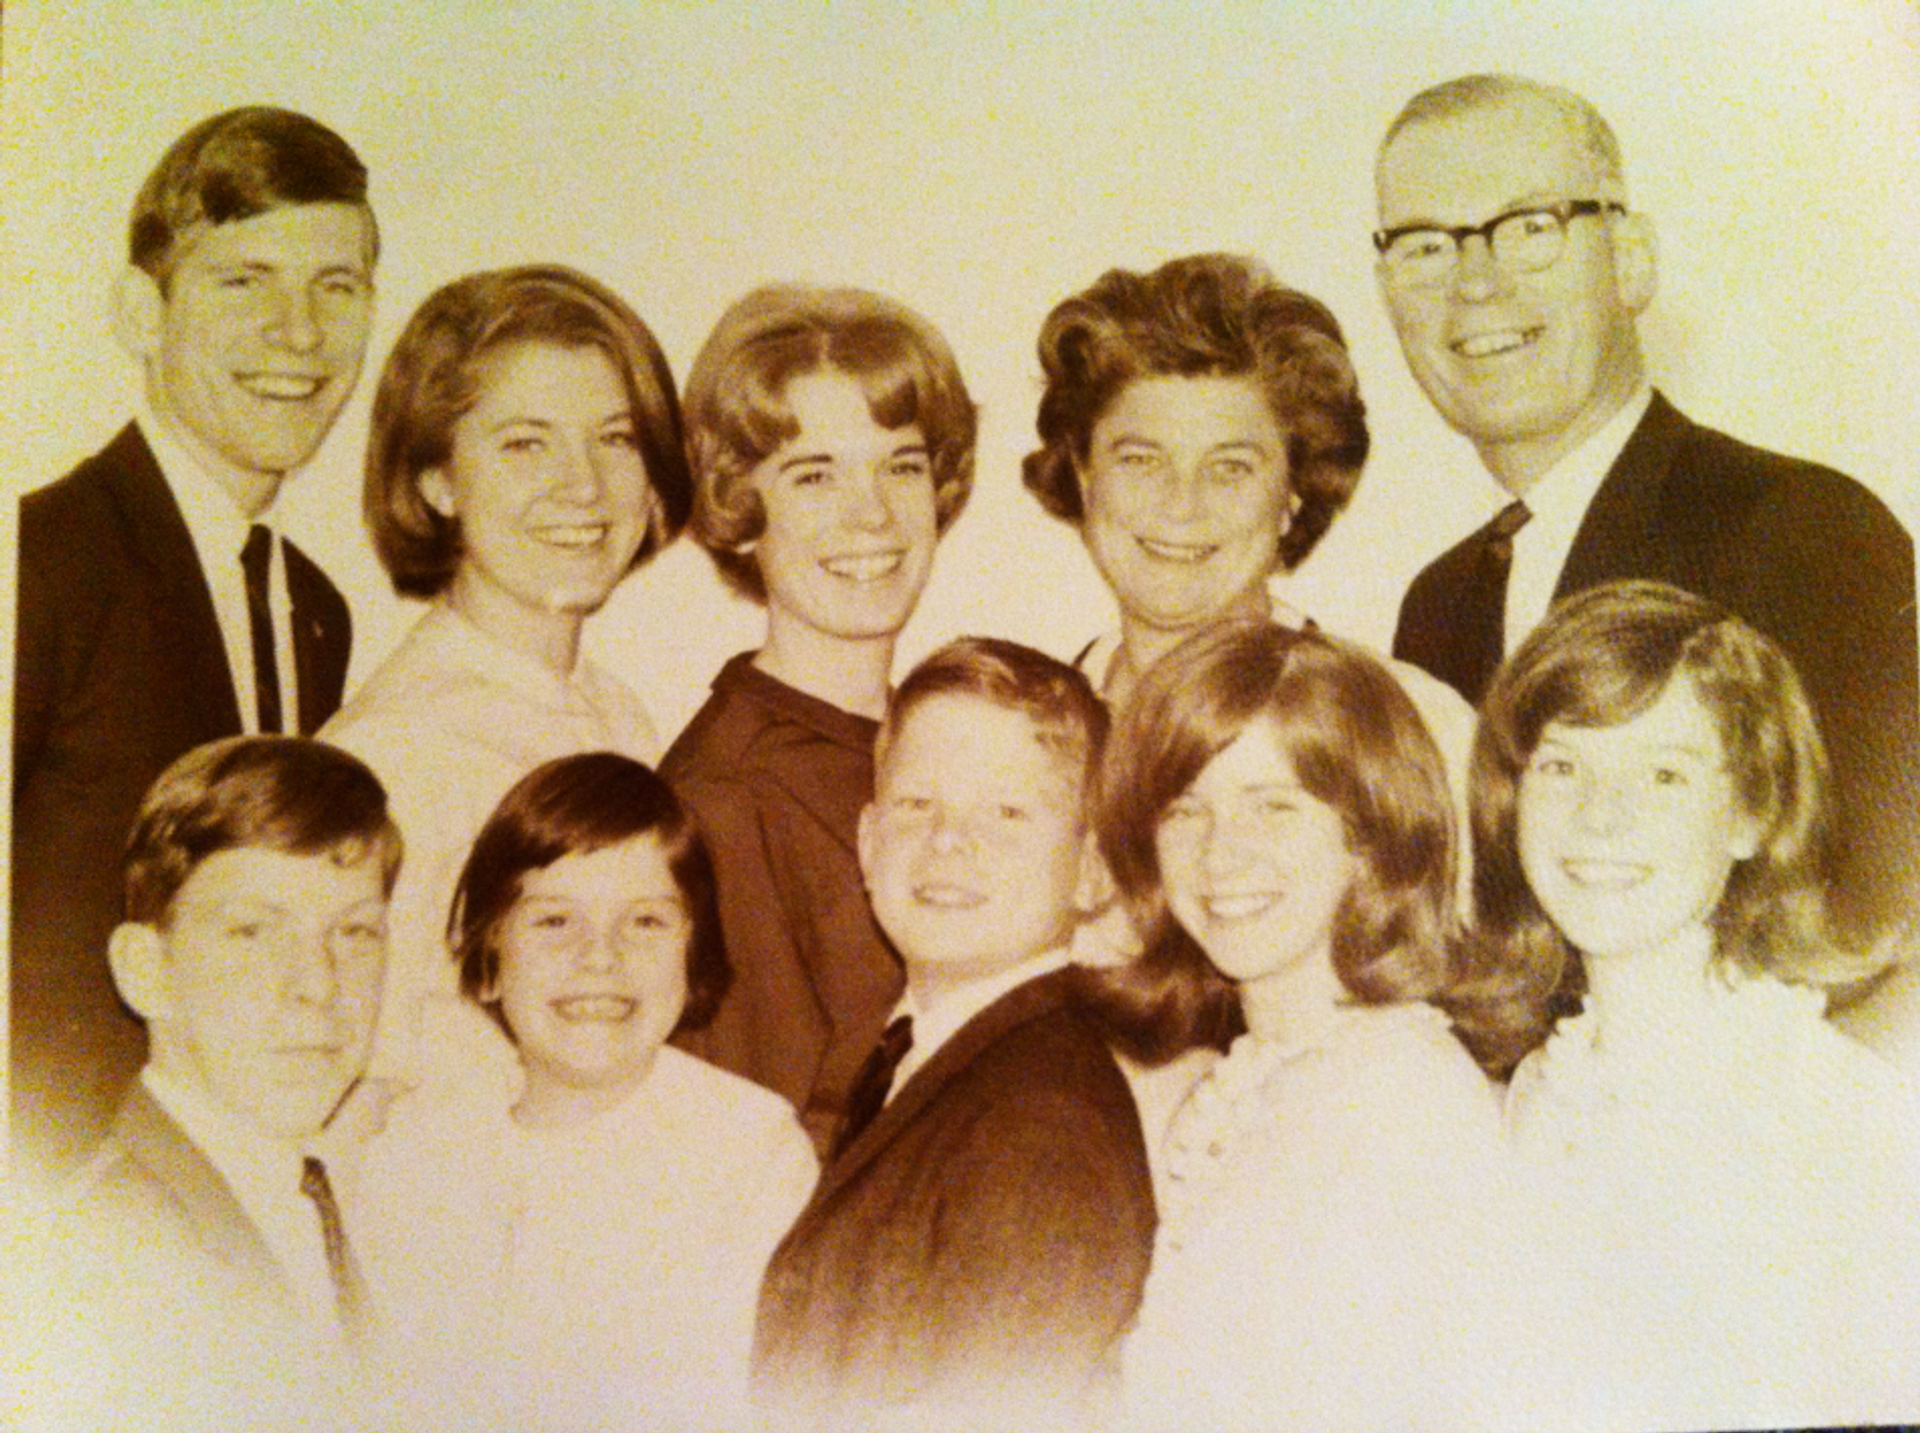 The Walsh family in the 1960s. Front row: Vincent, Arleen, Chris, Ellen, and Frances. Second row; James, Julie, Isabelle, and my parents Arleen Andersen Walsh and James Joseph Walsh.